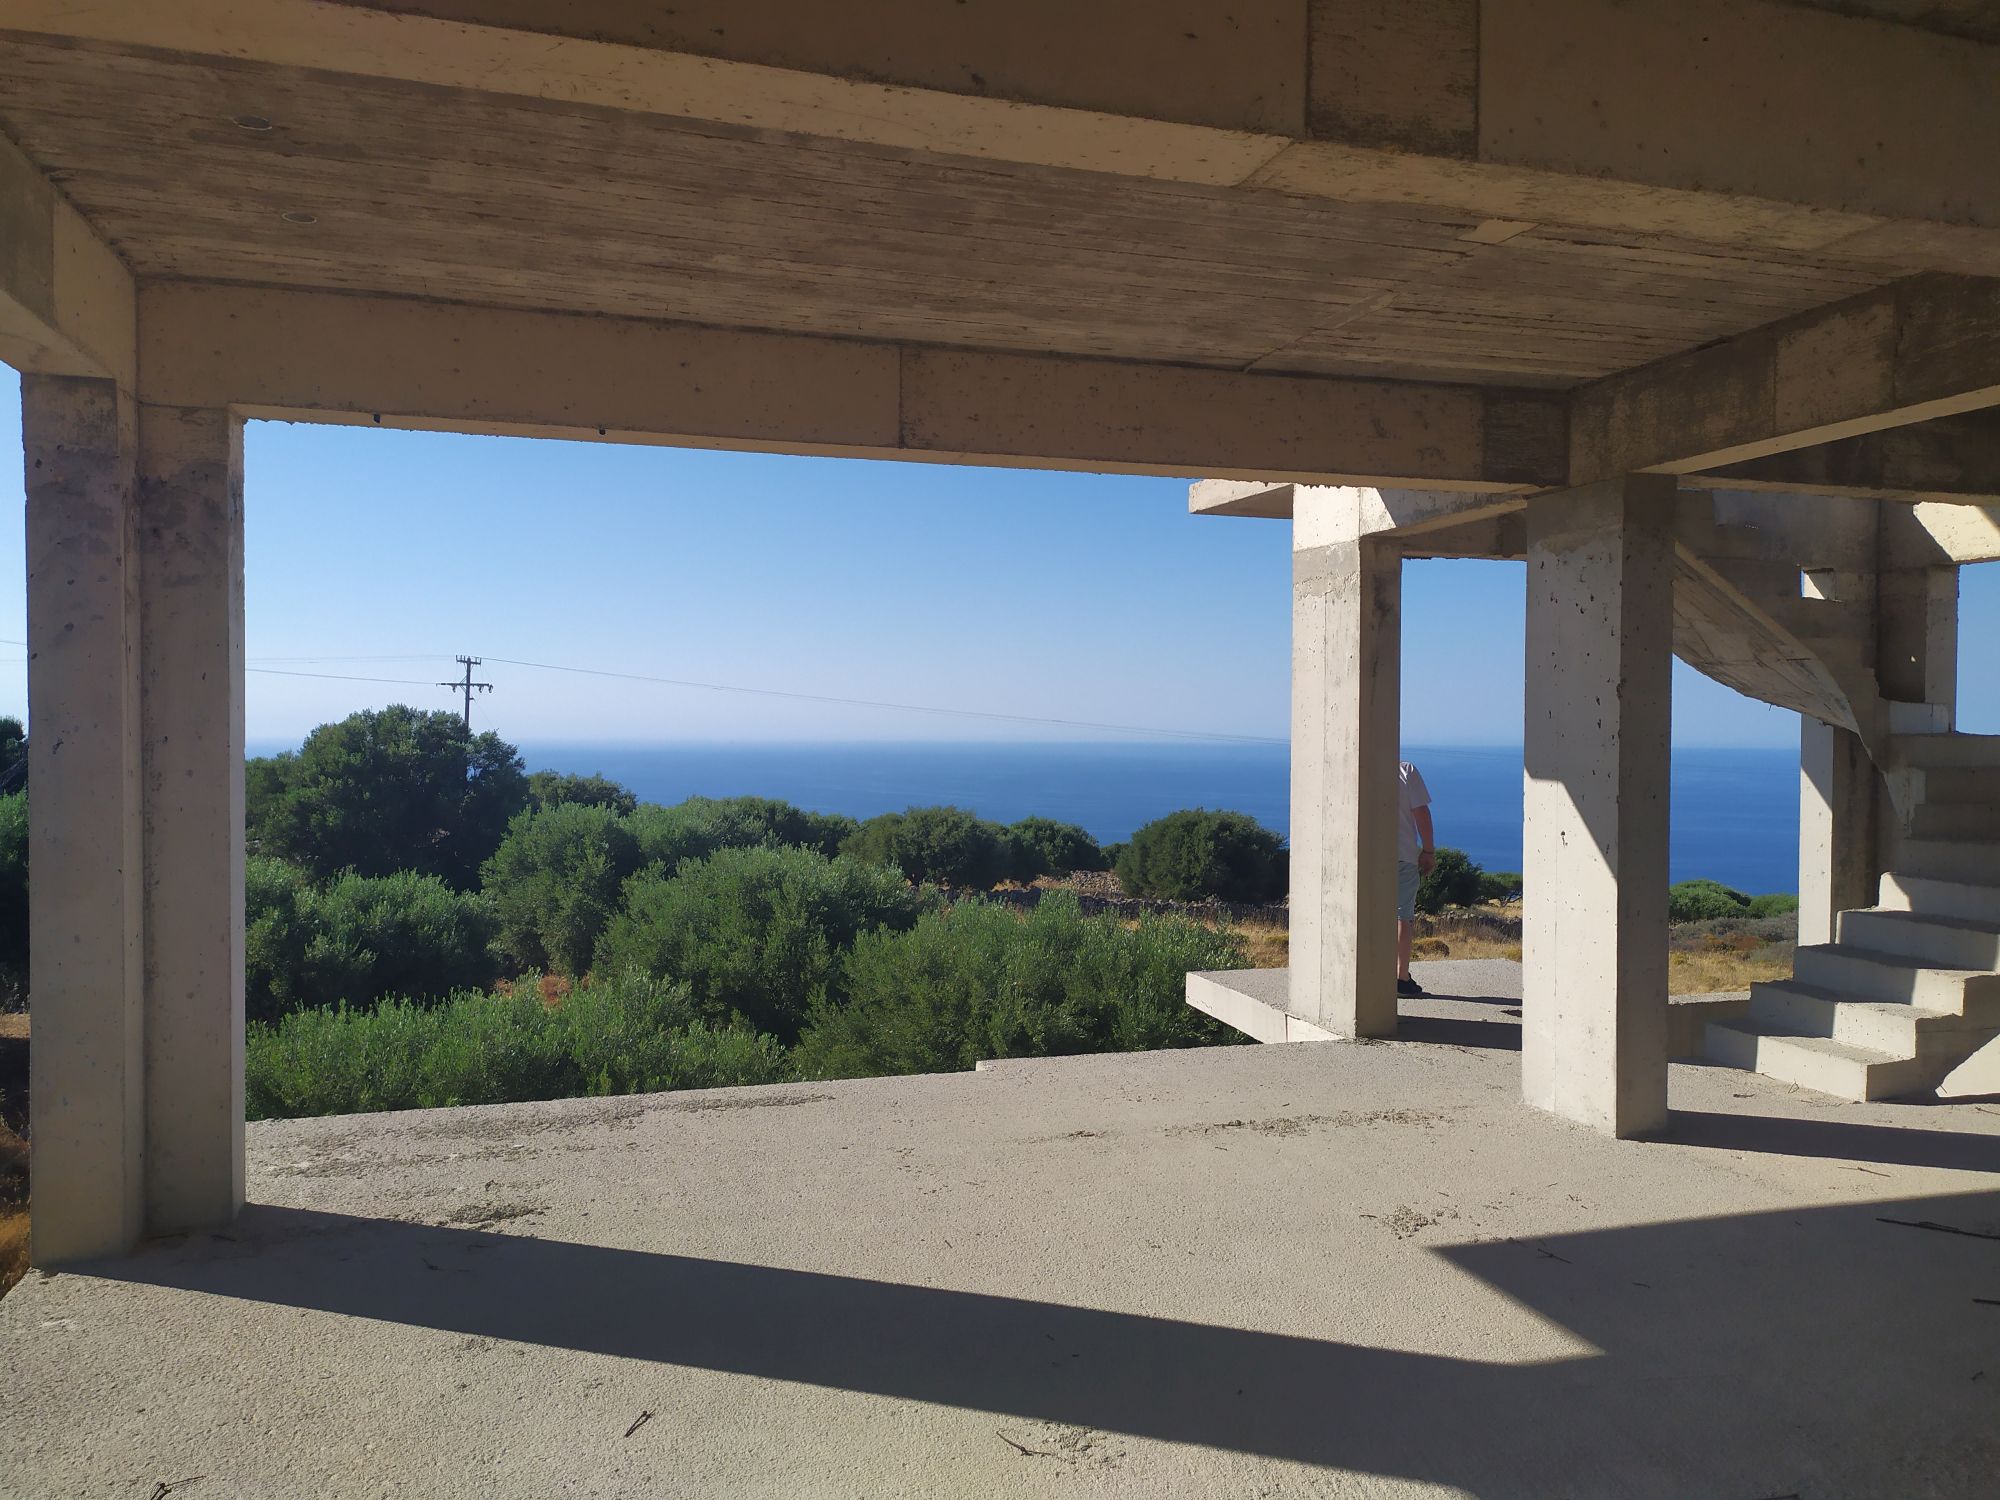 Concrete Skeleton of 300m2 With Sea Views In Village.